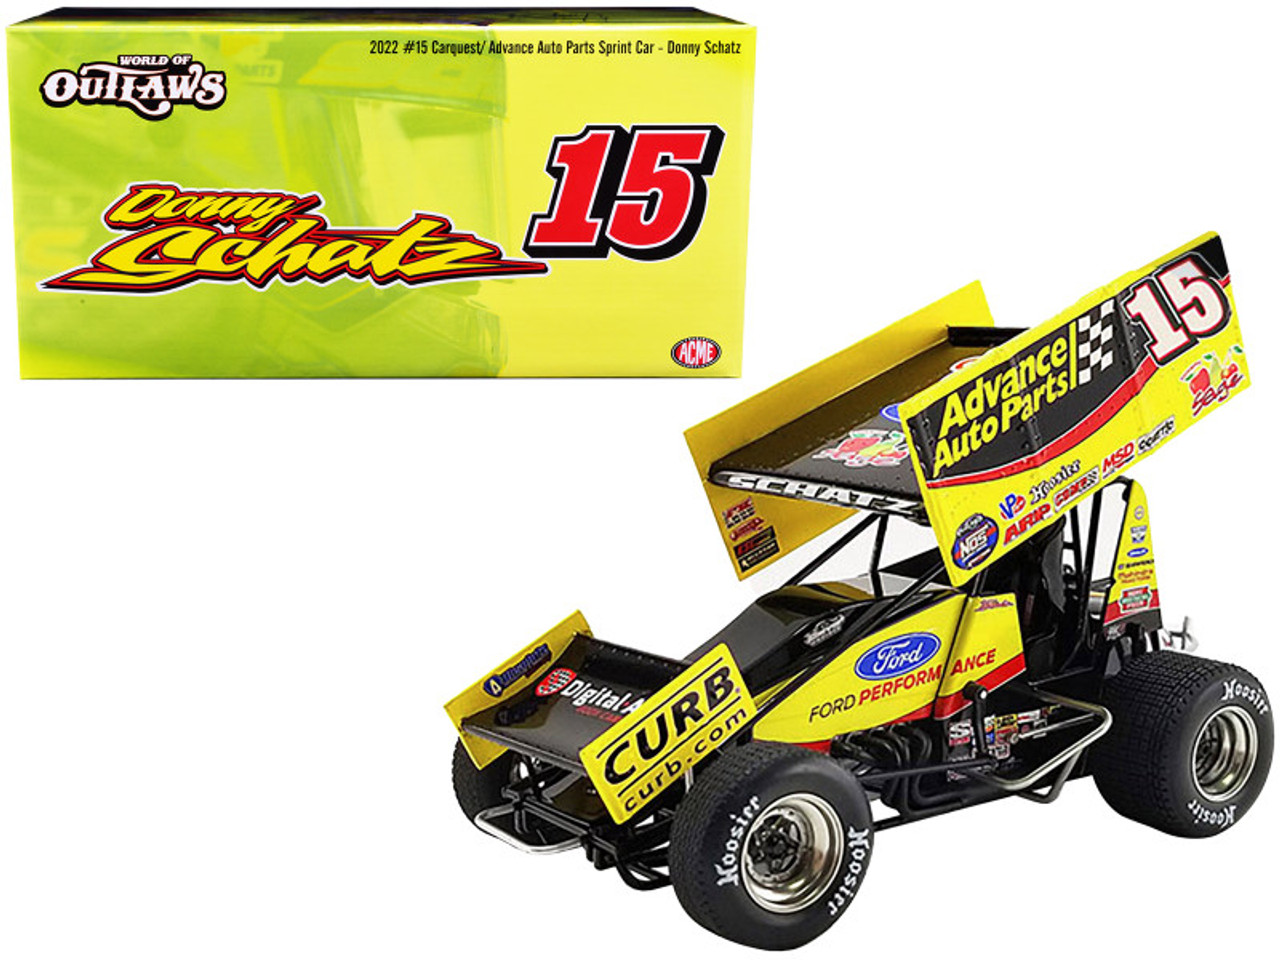 Winged Sprint Car #15 Donny Schatz "Advance Auto Parts" Tony Stewart Racing "World of Outlaws" (2022) 1/18 Diecast Model Car by ACME